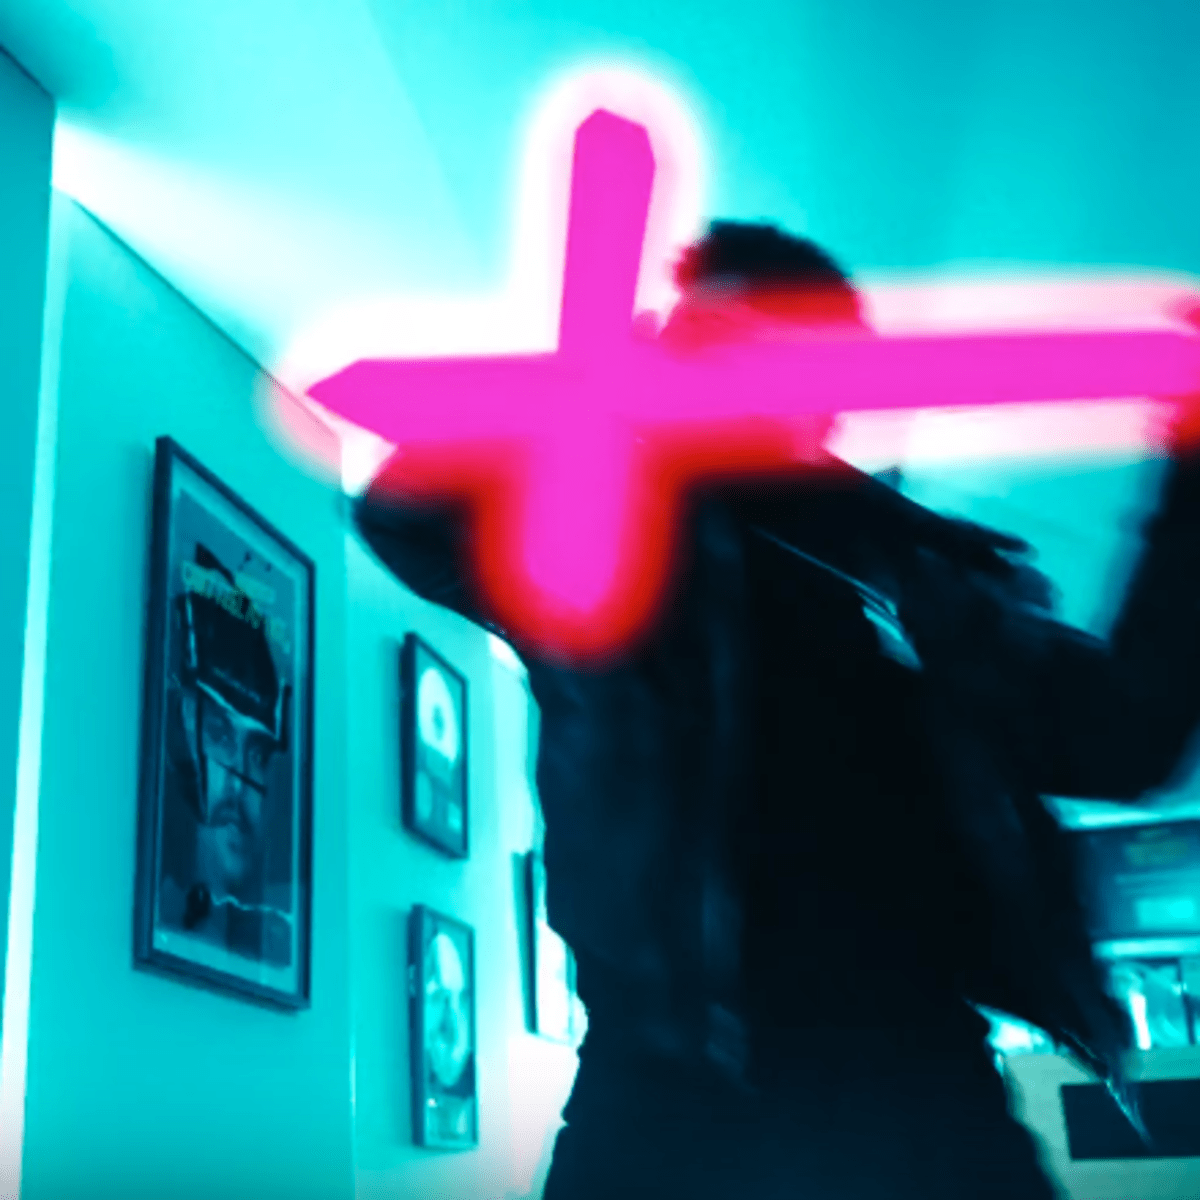 Watch: The Weeknd Rock Stars a Room with a Glowing Cross in His and Daft  Punk's 